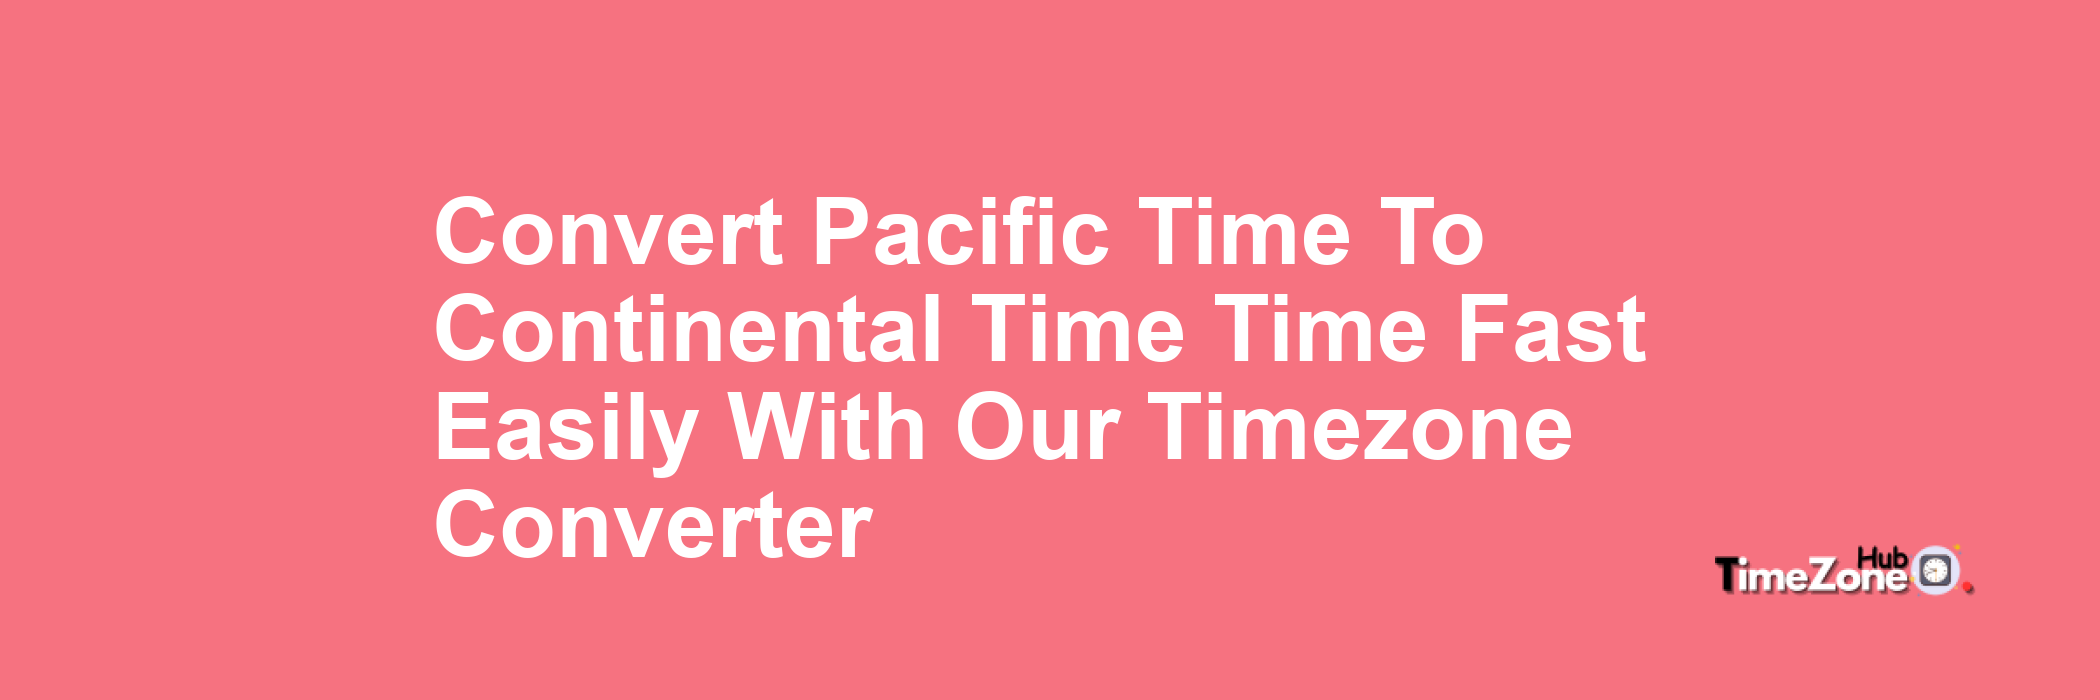 Pacific Time to Continental Time